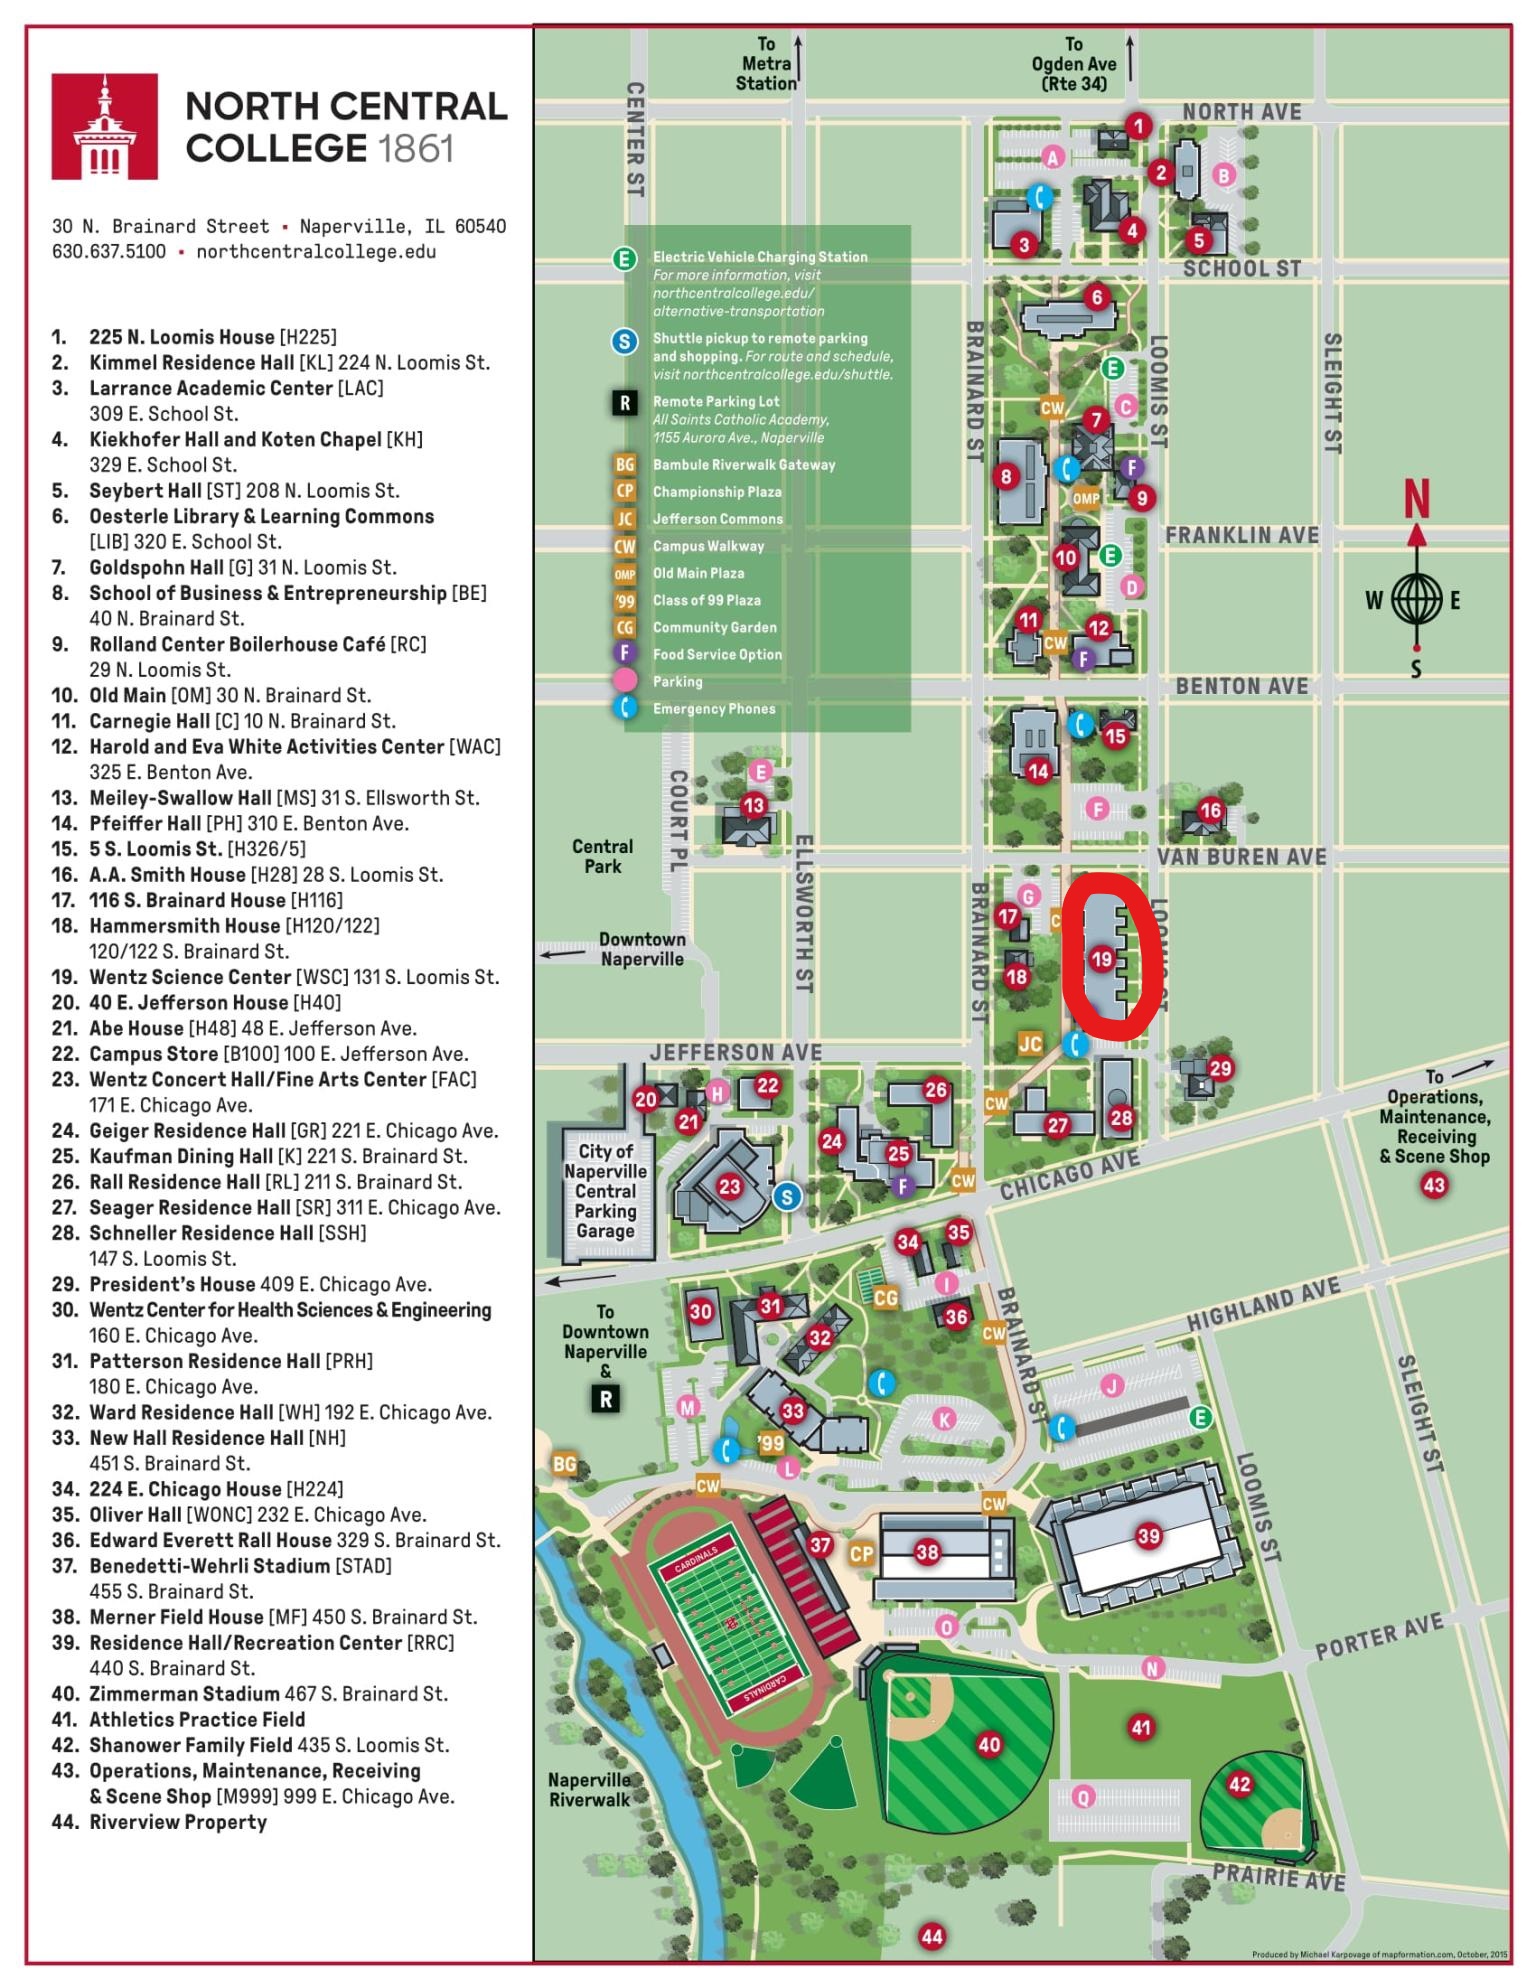 Campus Map WSC Wentz Science Center: training and classrooms 19